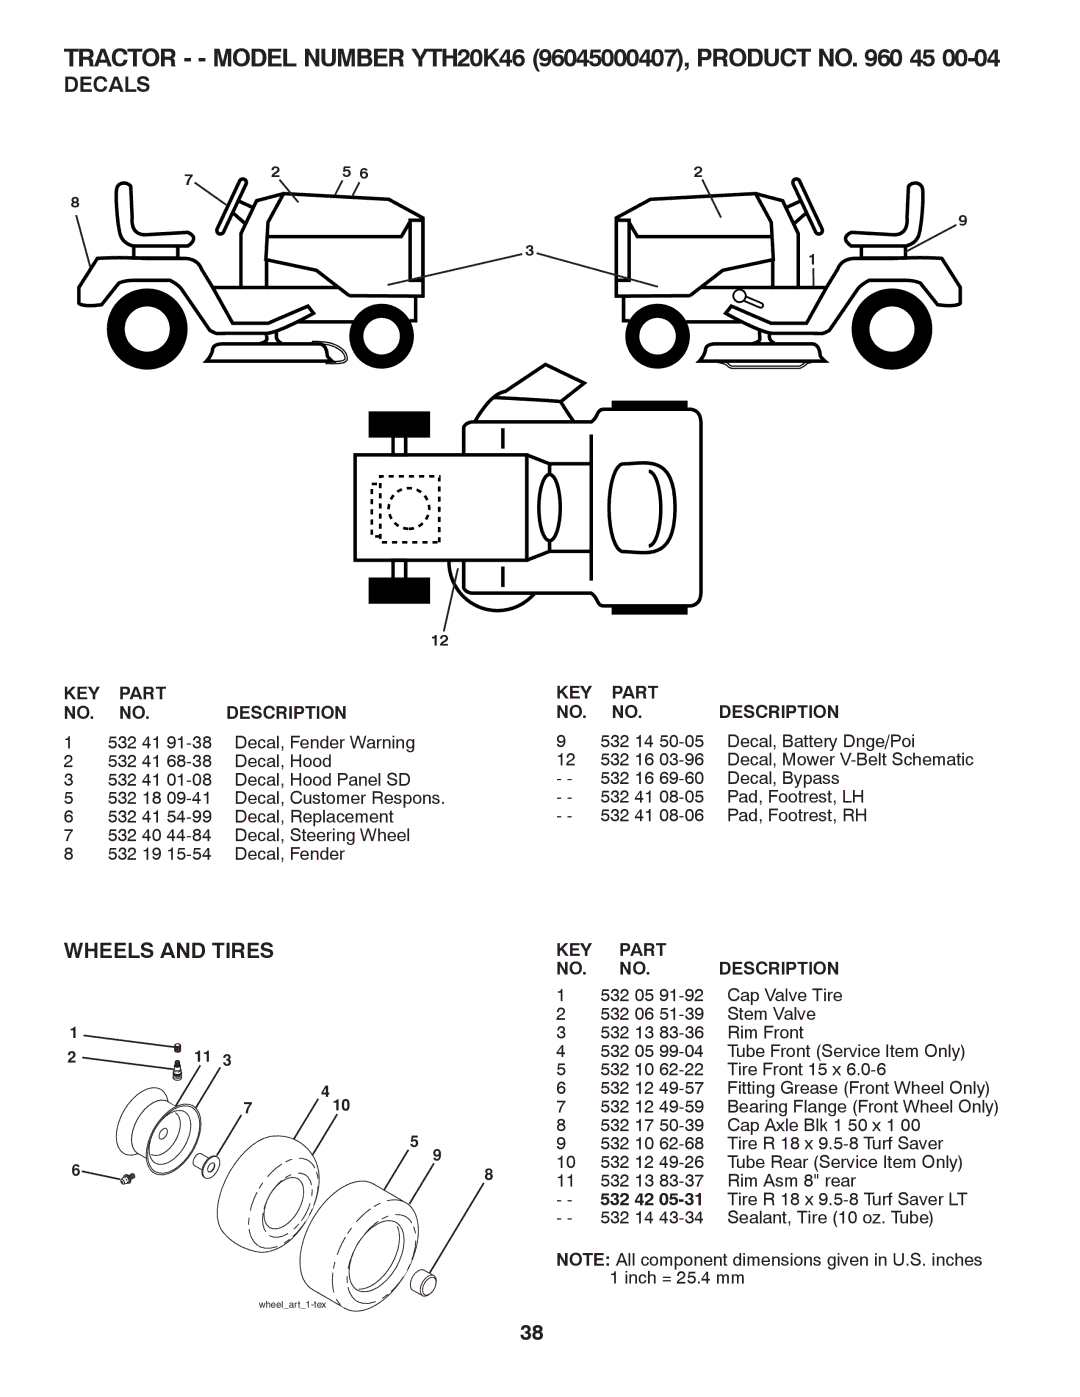 Husqvarna 96045000407 owner manual Decals, Wheels and Tires 